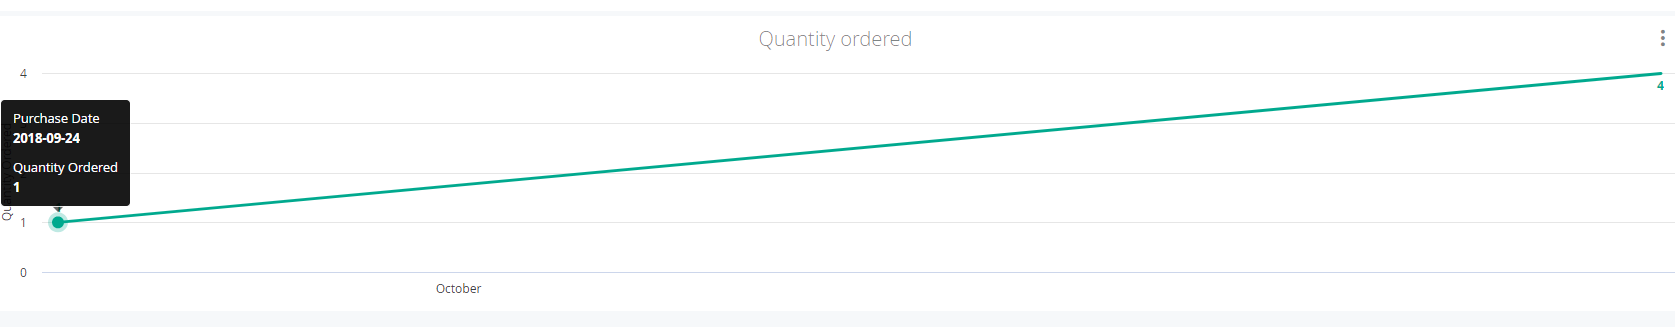 8_quantity_ordered.PNG